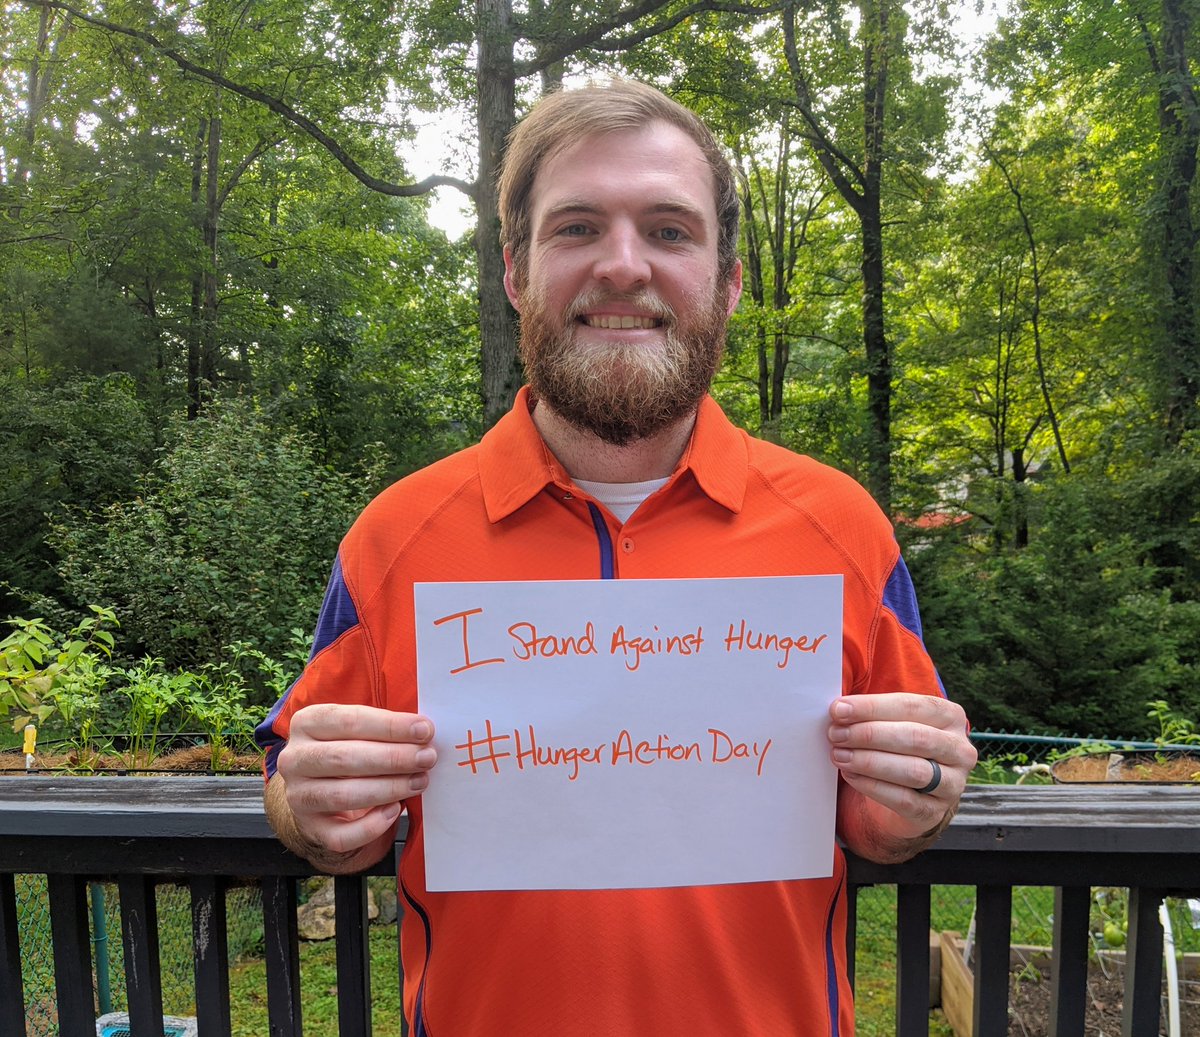 September is a month to spread the word & take action on the hunger crisis. Today, I wear orange in support of #HungerActionDay! Thank you to all those that dedicate themselves to a solution like #WNC's @MANNAFoodBank!